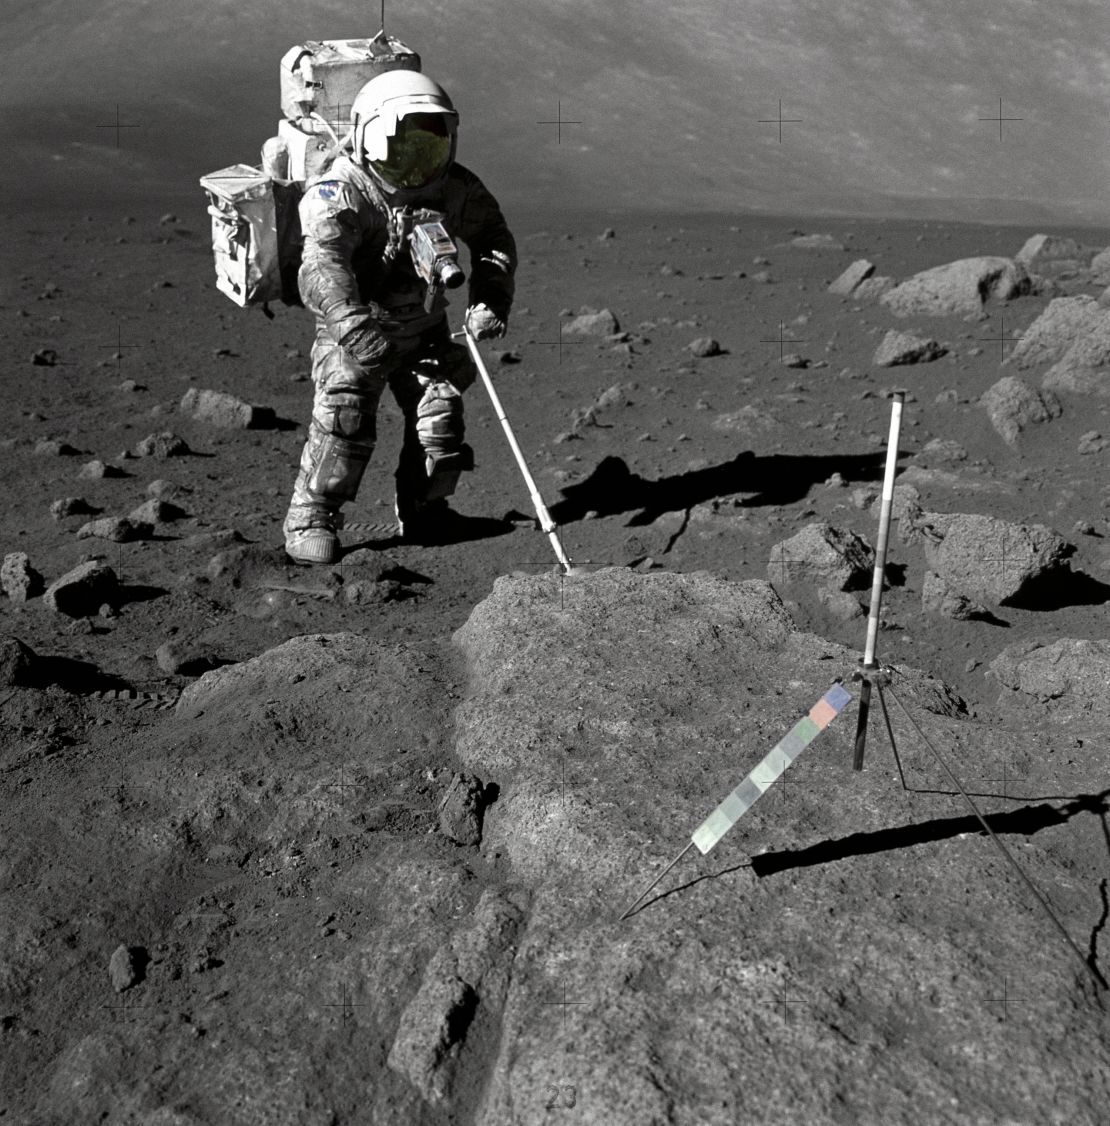 Geologist-Astronaut Harrison Schmitt, Apollo 17 lunar module pilot, uses an adjustable sampling scoop to retrieve lunar samples during the second extravehicular activity (EVA-2), at Station 5 at the Taurus- Littrow landing site. The cohesive nature of the lunar soil is born out by the 